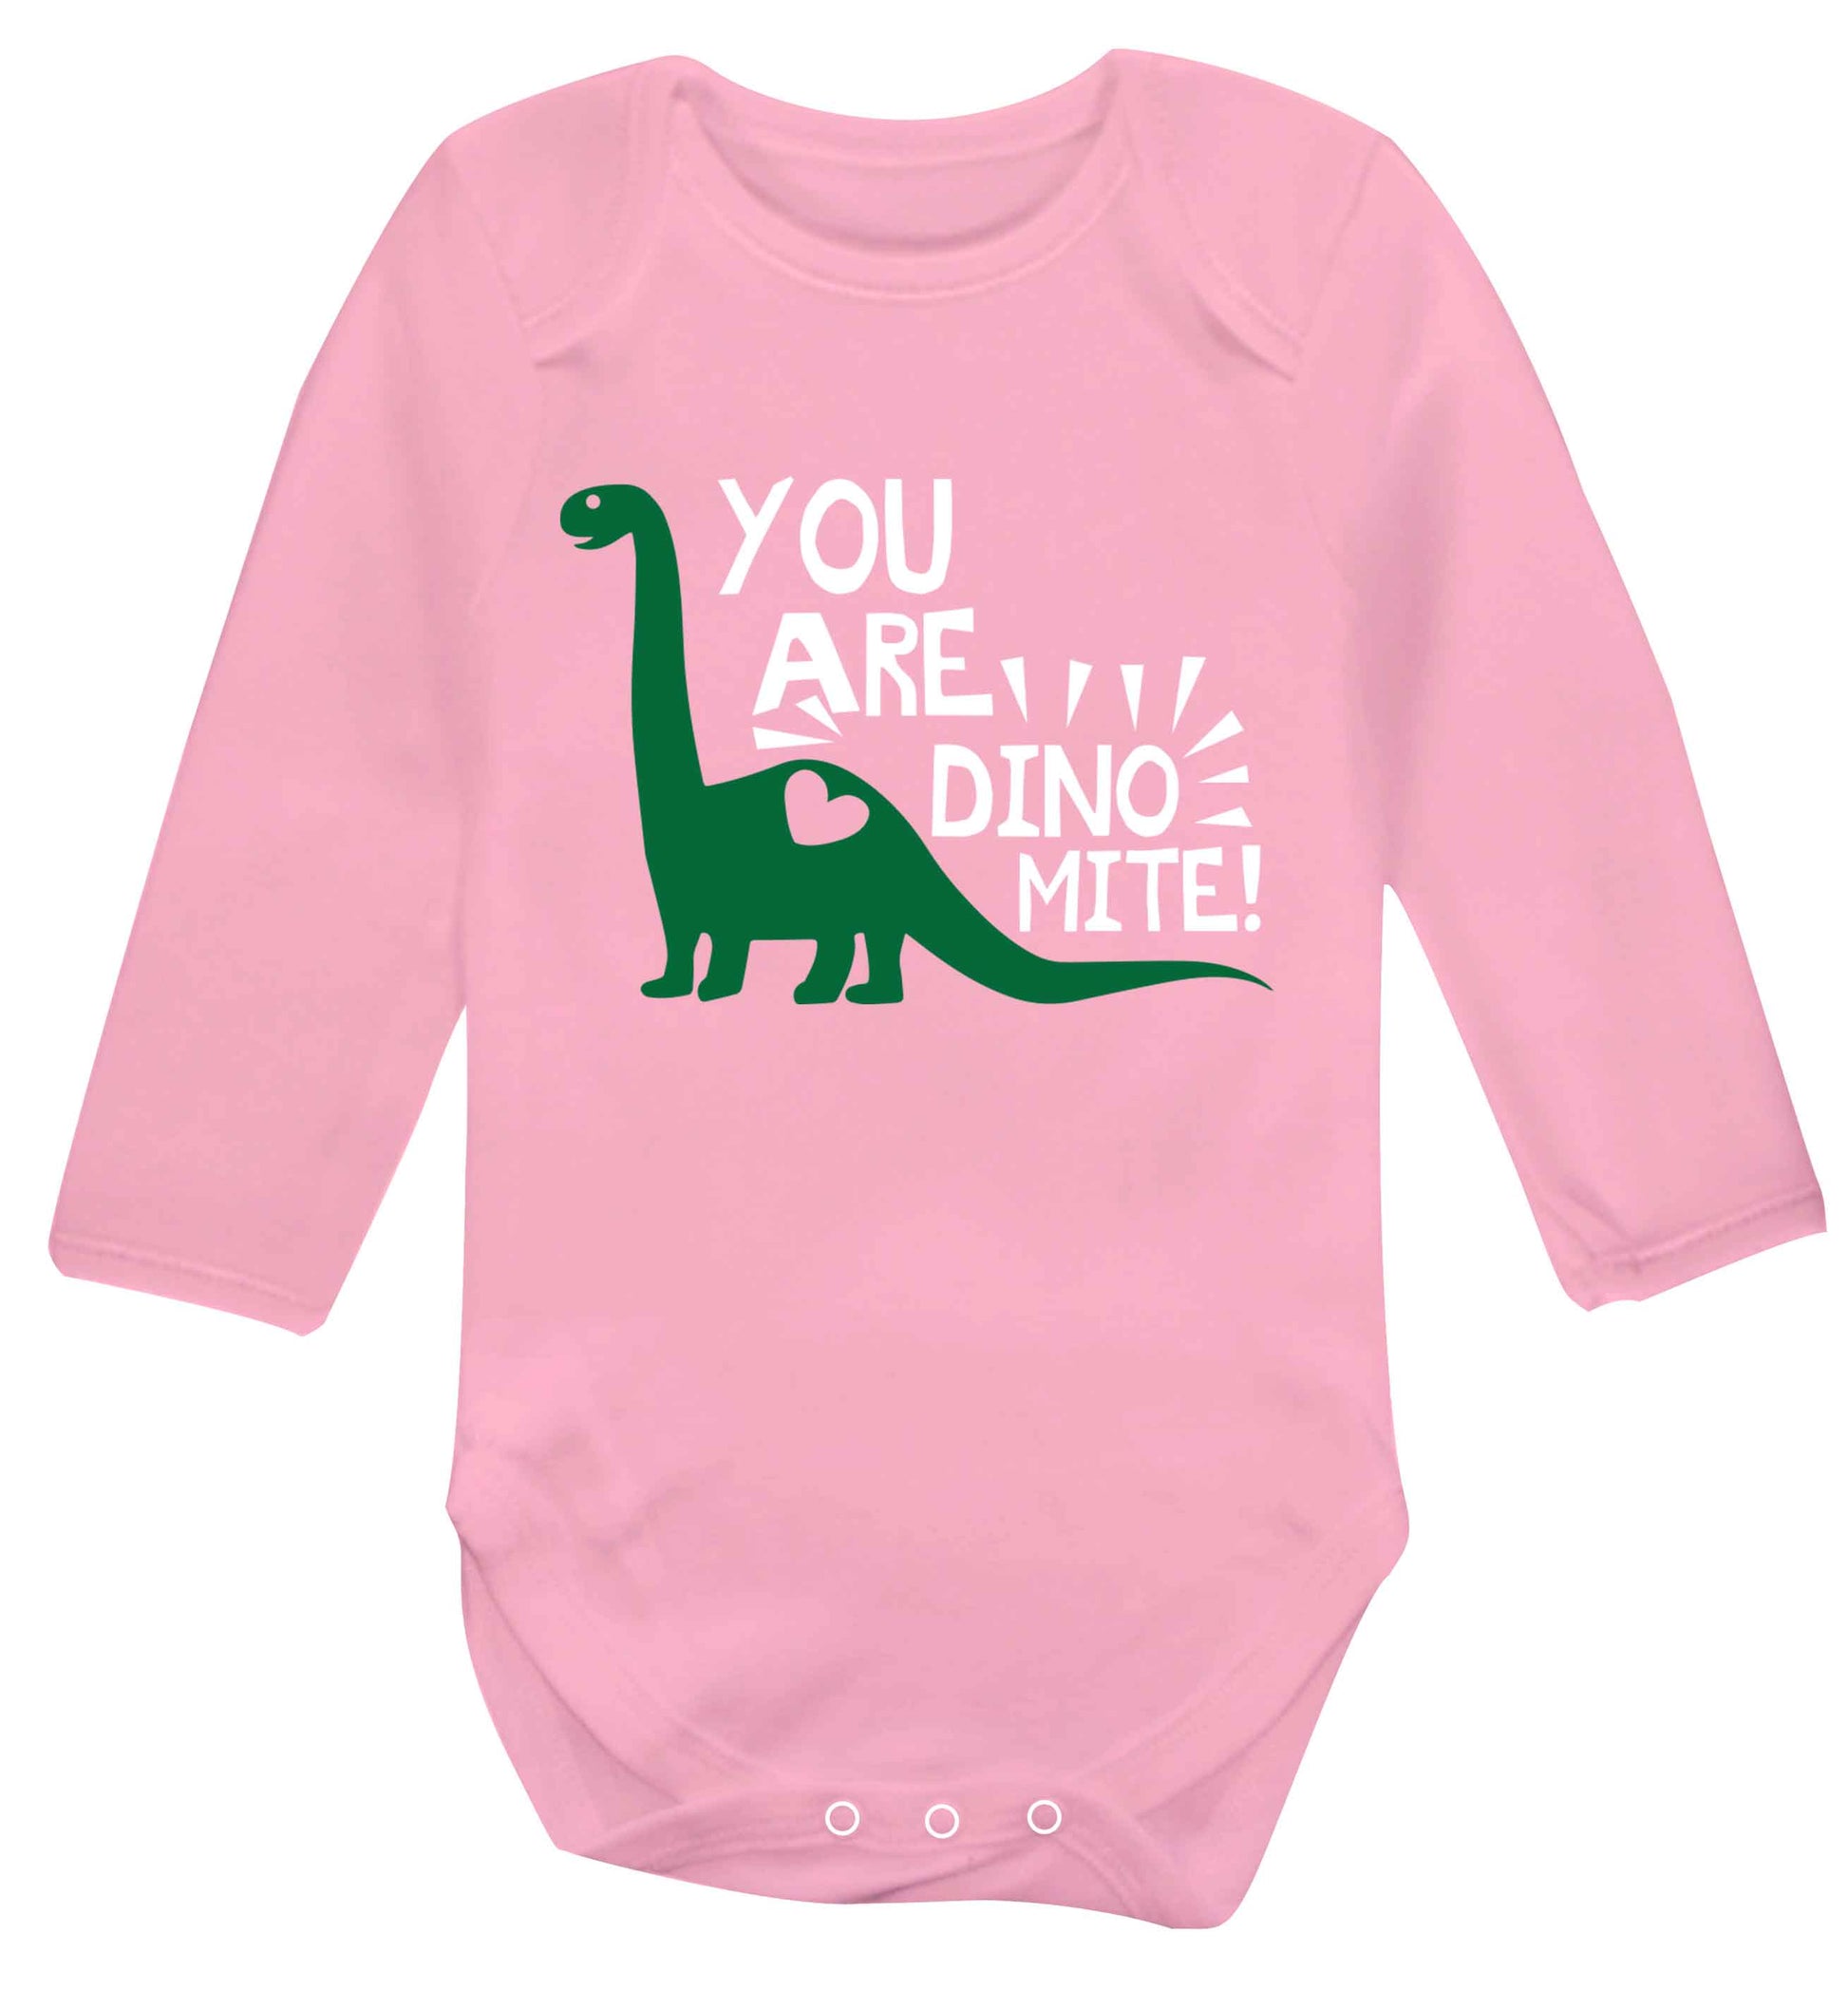 You are dinomite! Baby Vest long sleeved pale pink 6-12 months